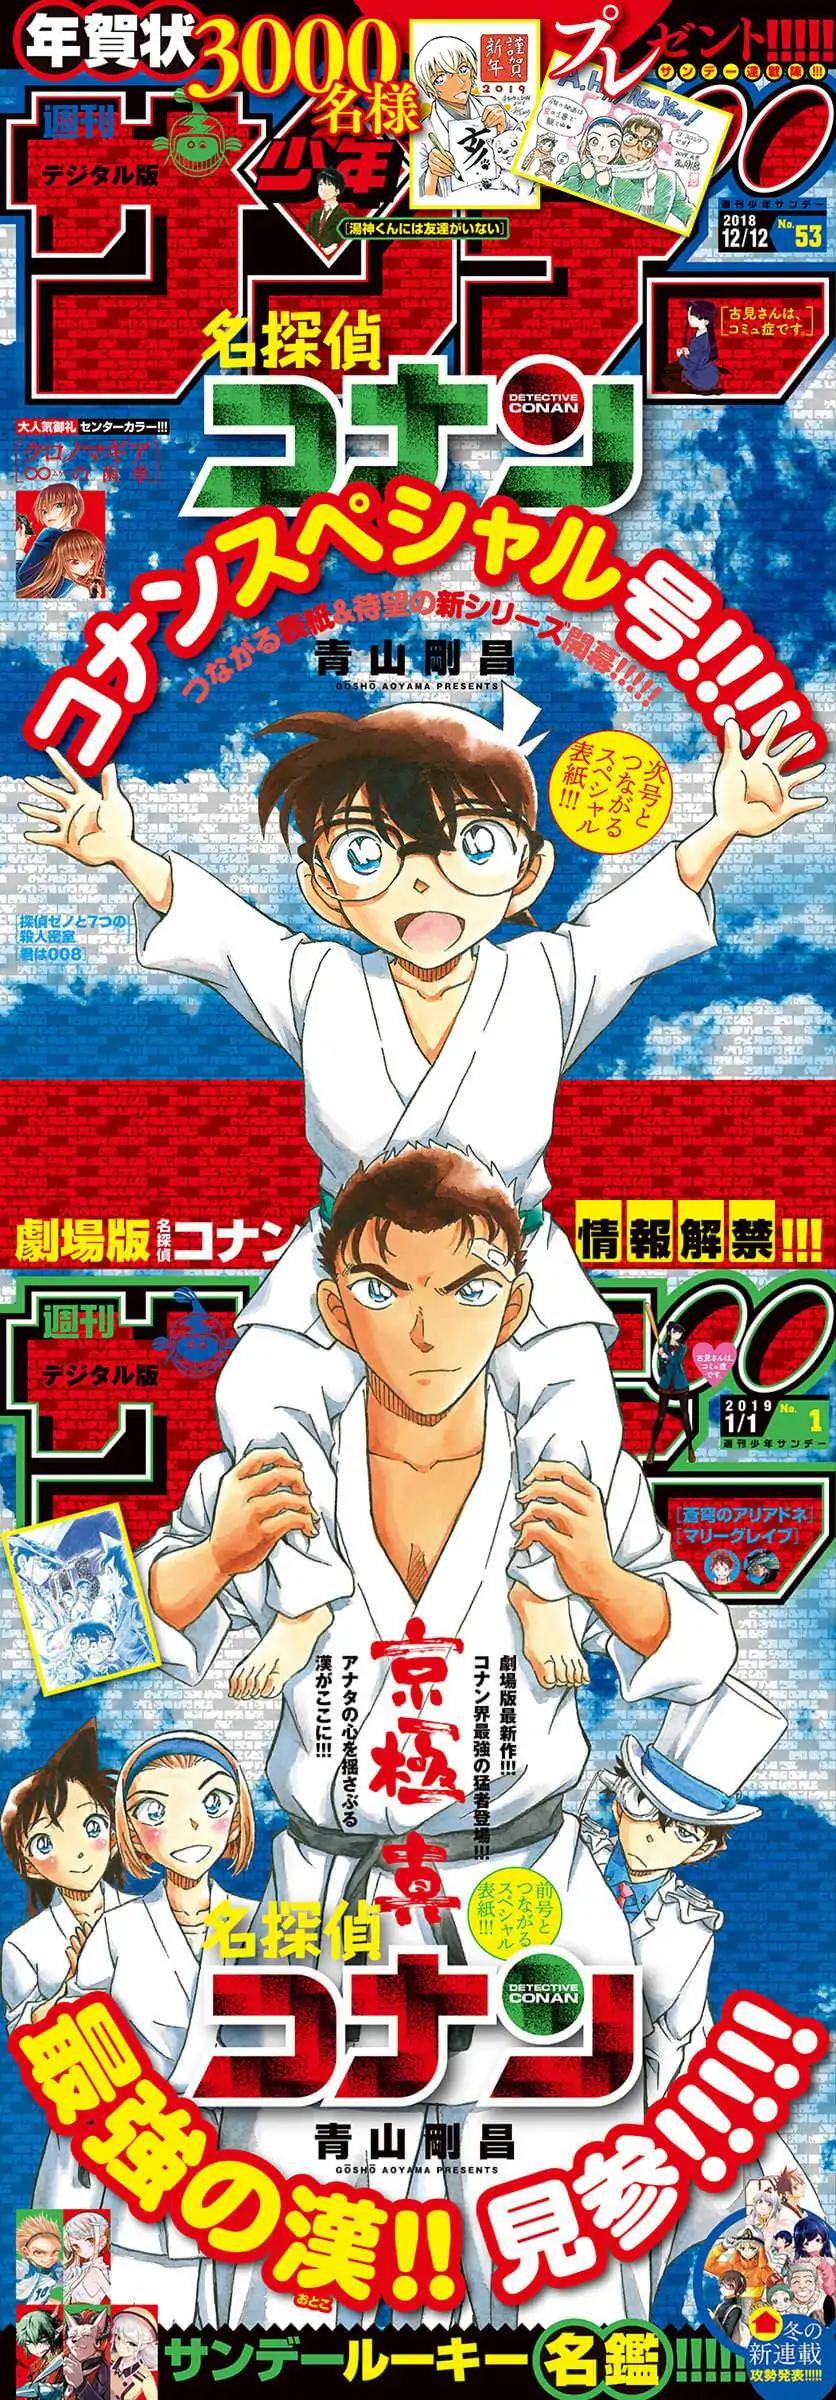 Read Detective Conan Chapter 1023 - Page 1 For Free In The Highest Quality